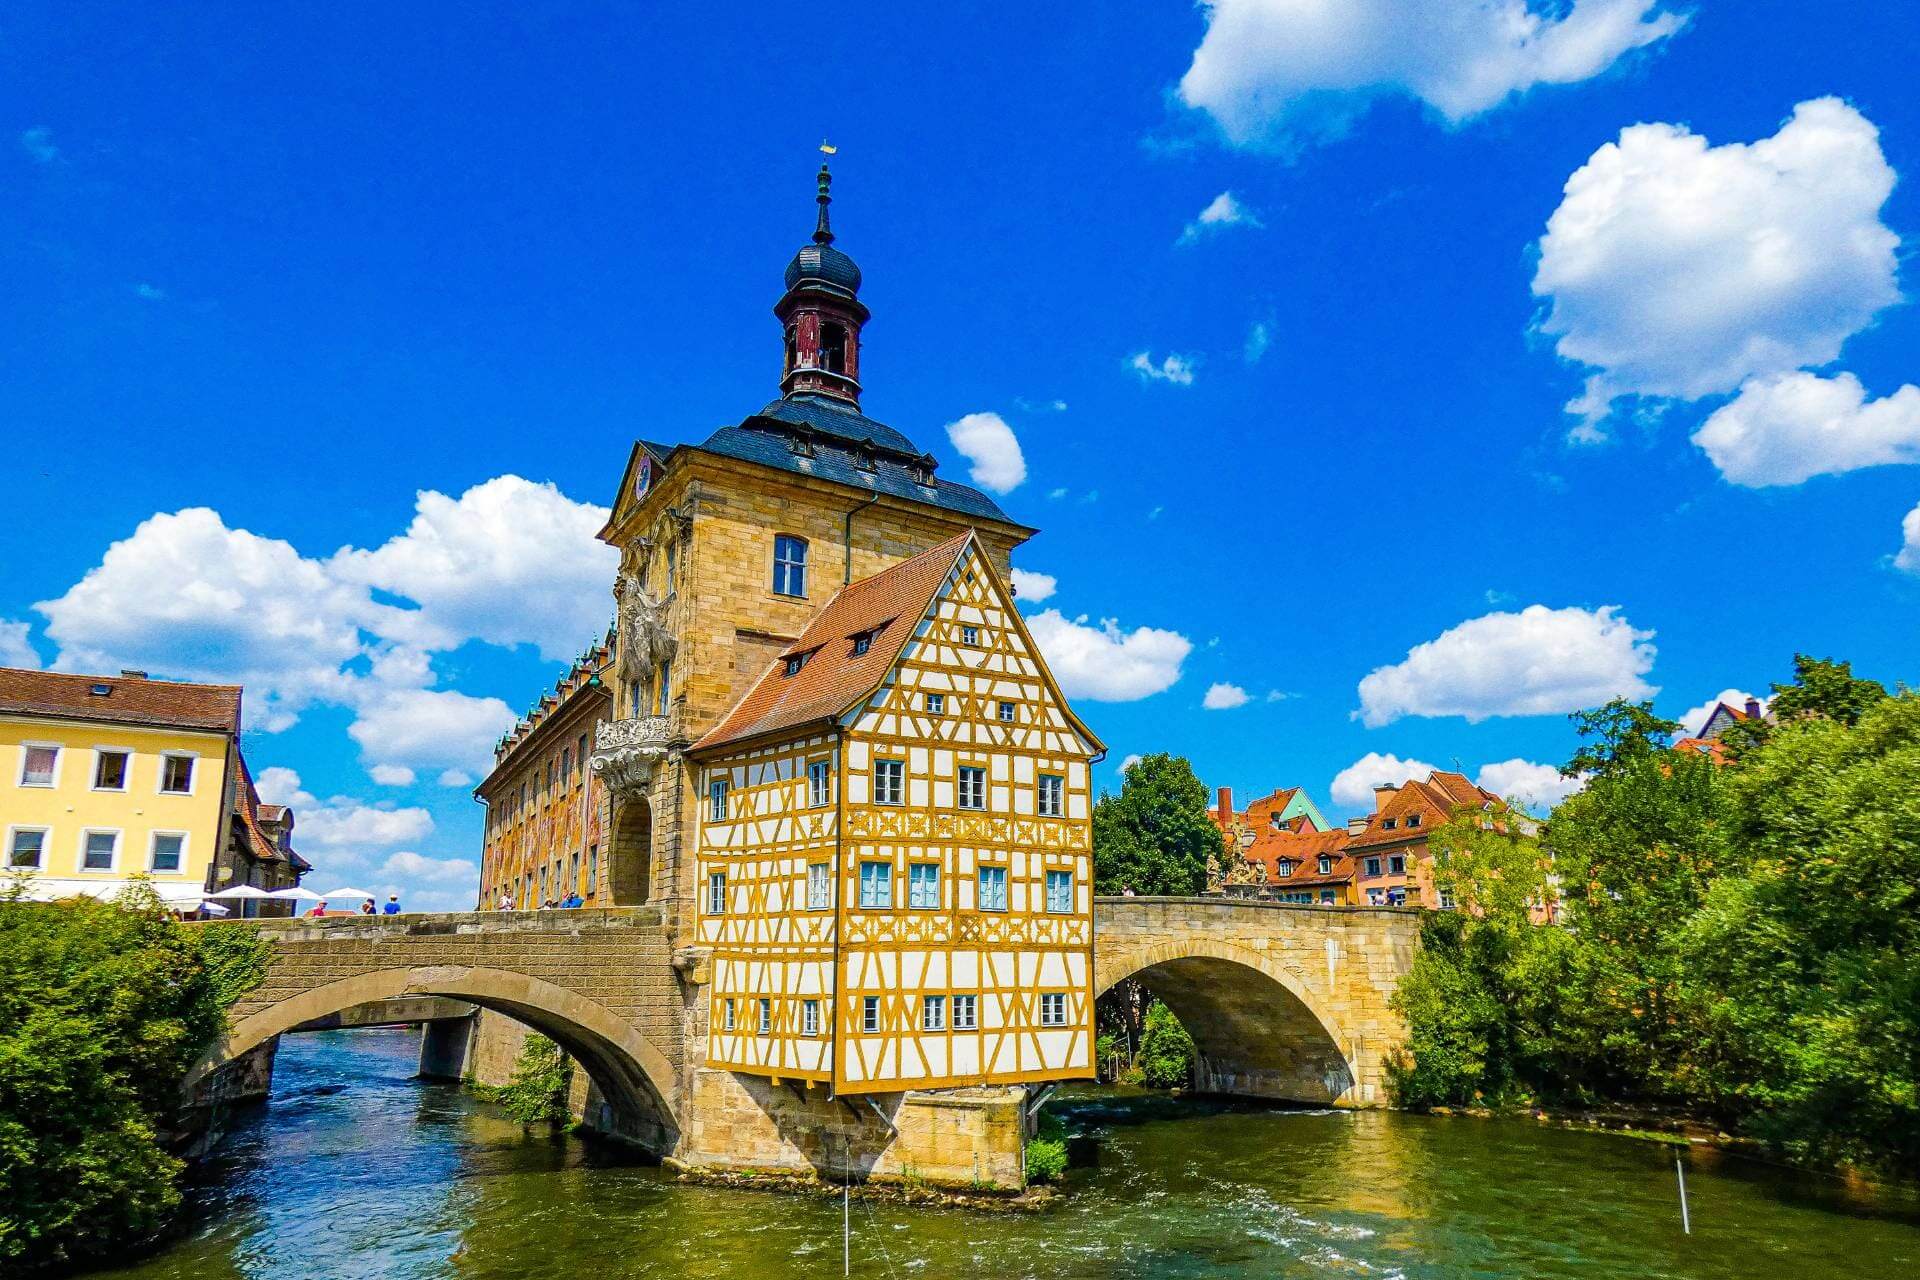 unesco-worldheritage-germany-old-town-bamberg-town-hall-angiestravelroutes.com